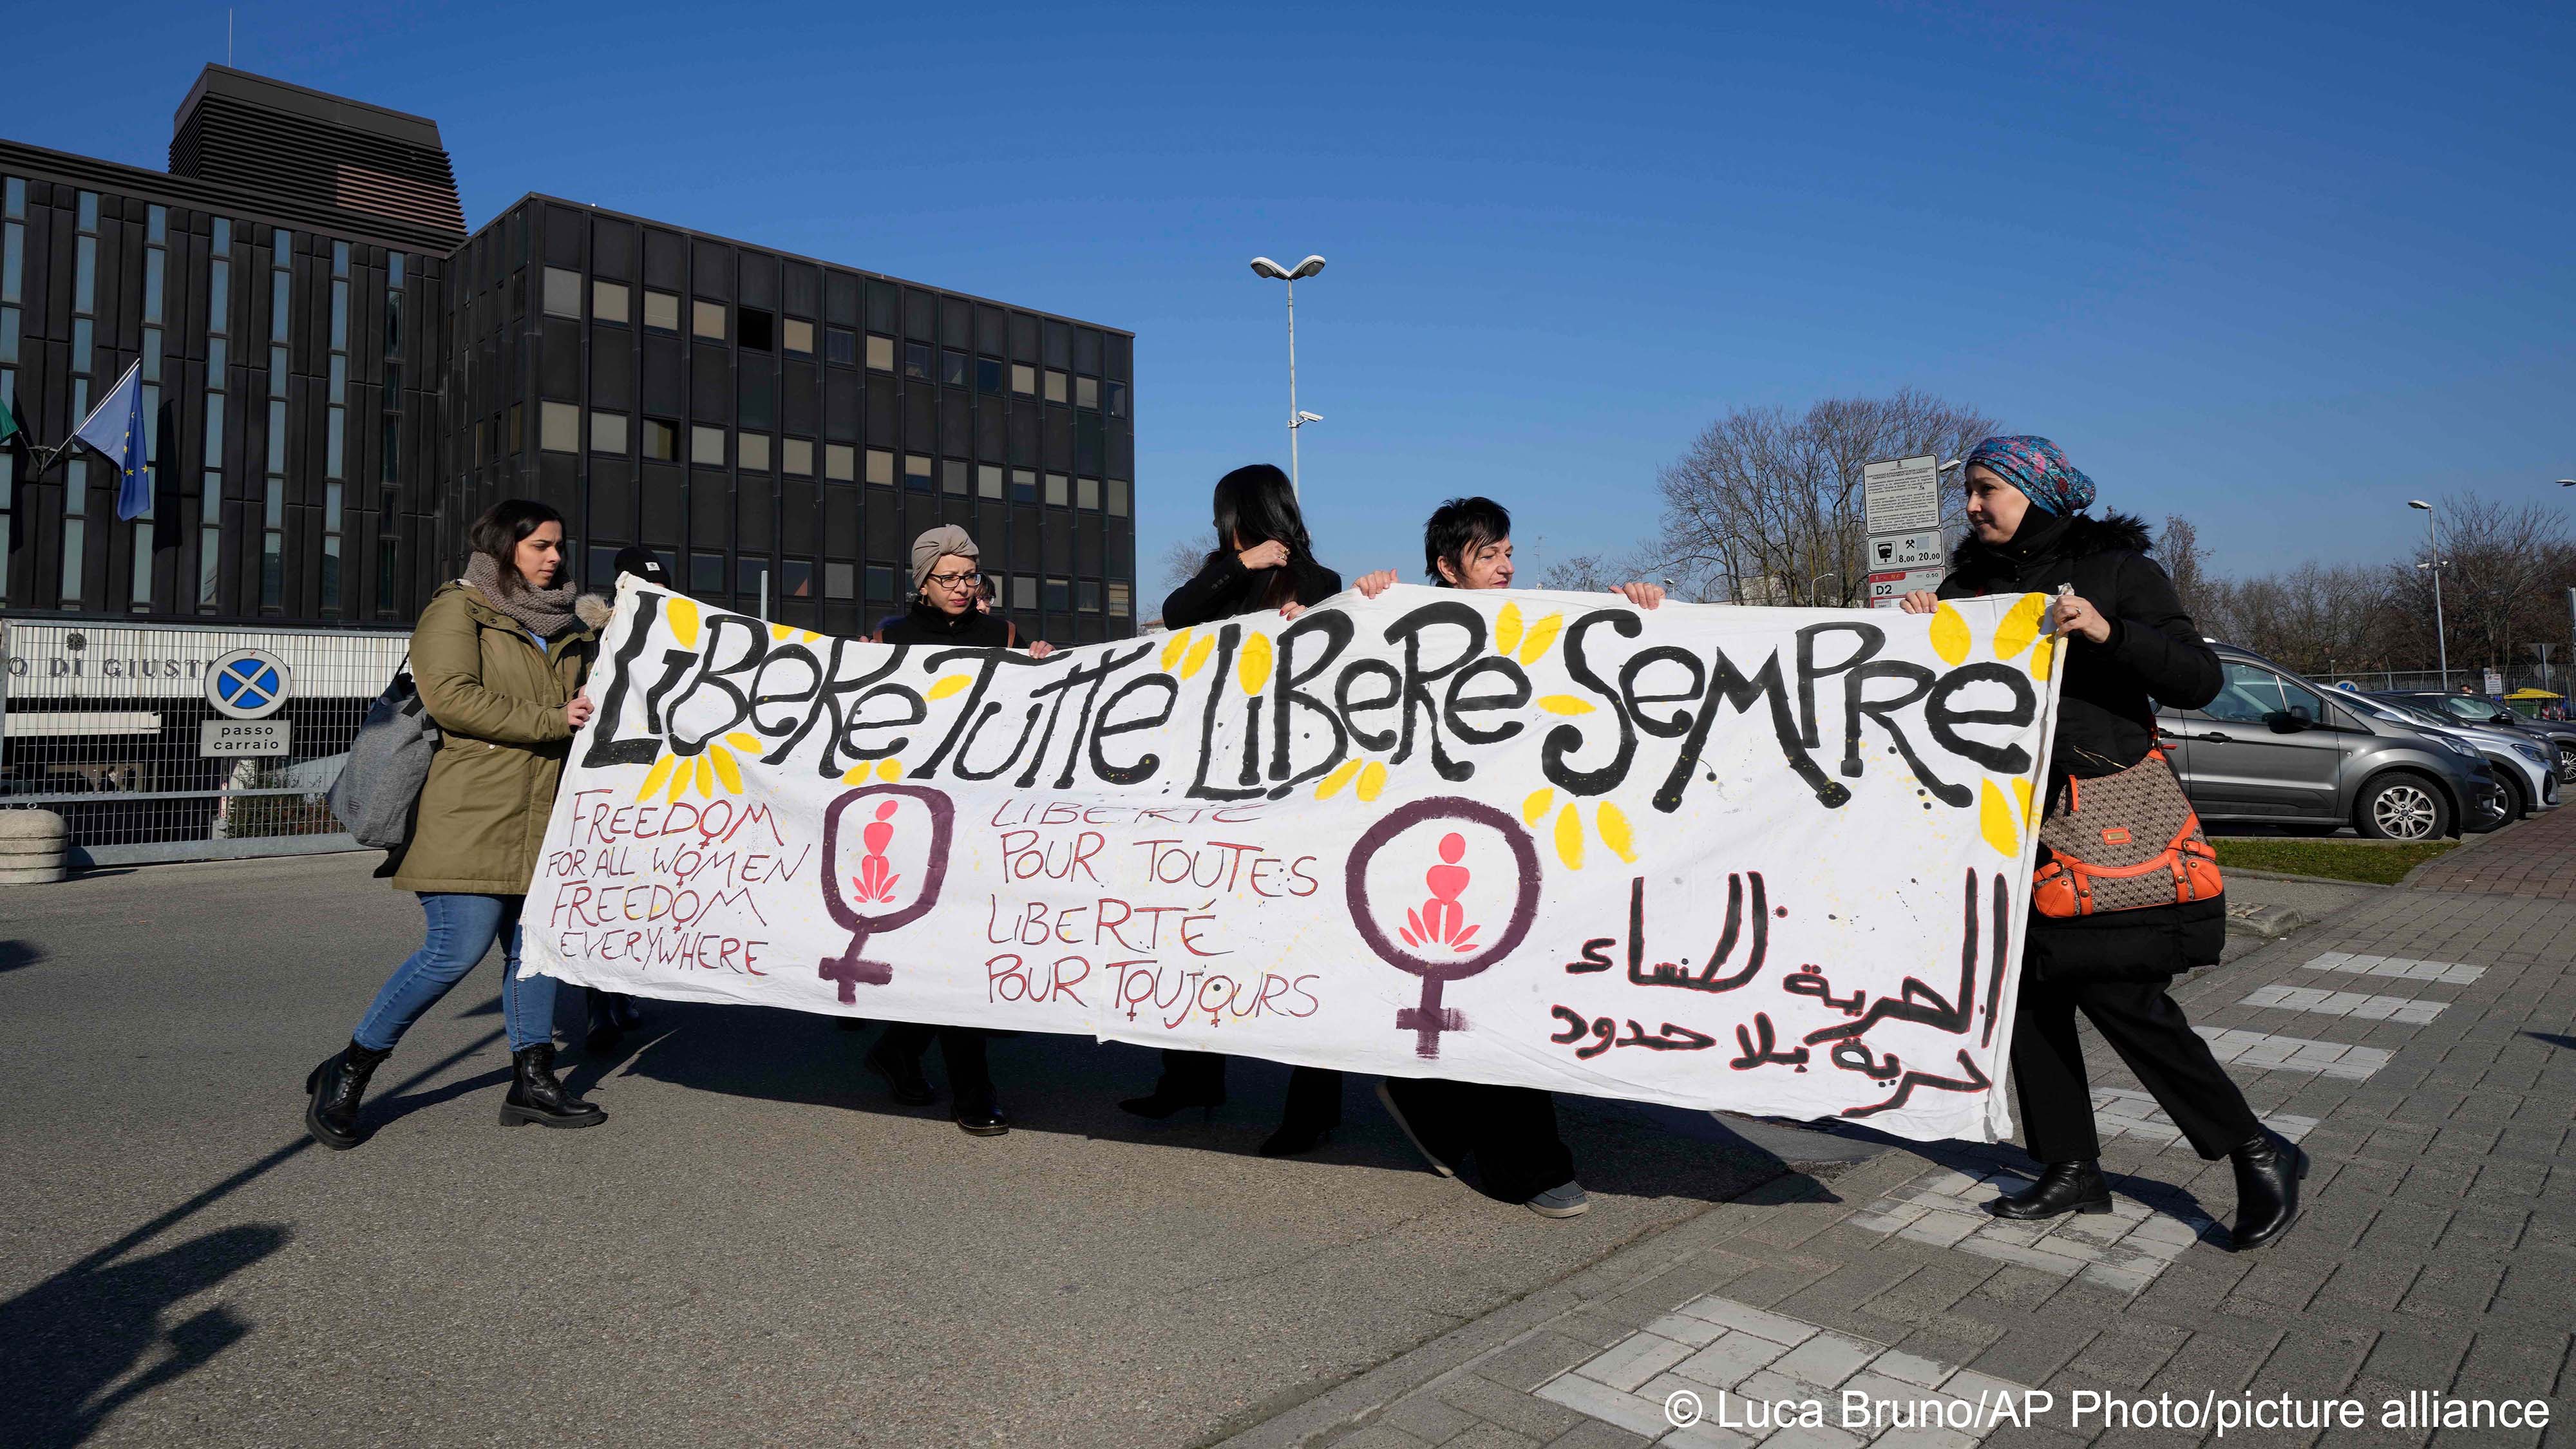 Activists of the ‘Trama di Terre’ (Weaving of Native Lands) and other women’s advocacy groups display a banner in Italian reading ‘Freedom for all women, forever free’, outside the Reggio Emilia courthouse in northern Italy, during the opening session of trial for the alleged murder of Pakistani-born Saman Abbas on 10 February 2023 (image: Luca Bruno/AP Photo/picture alliance) 